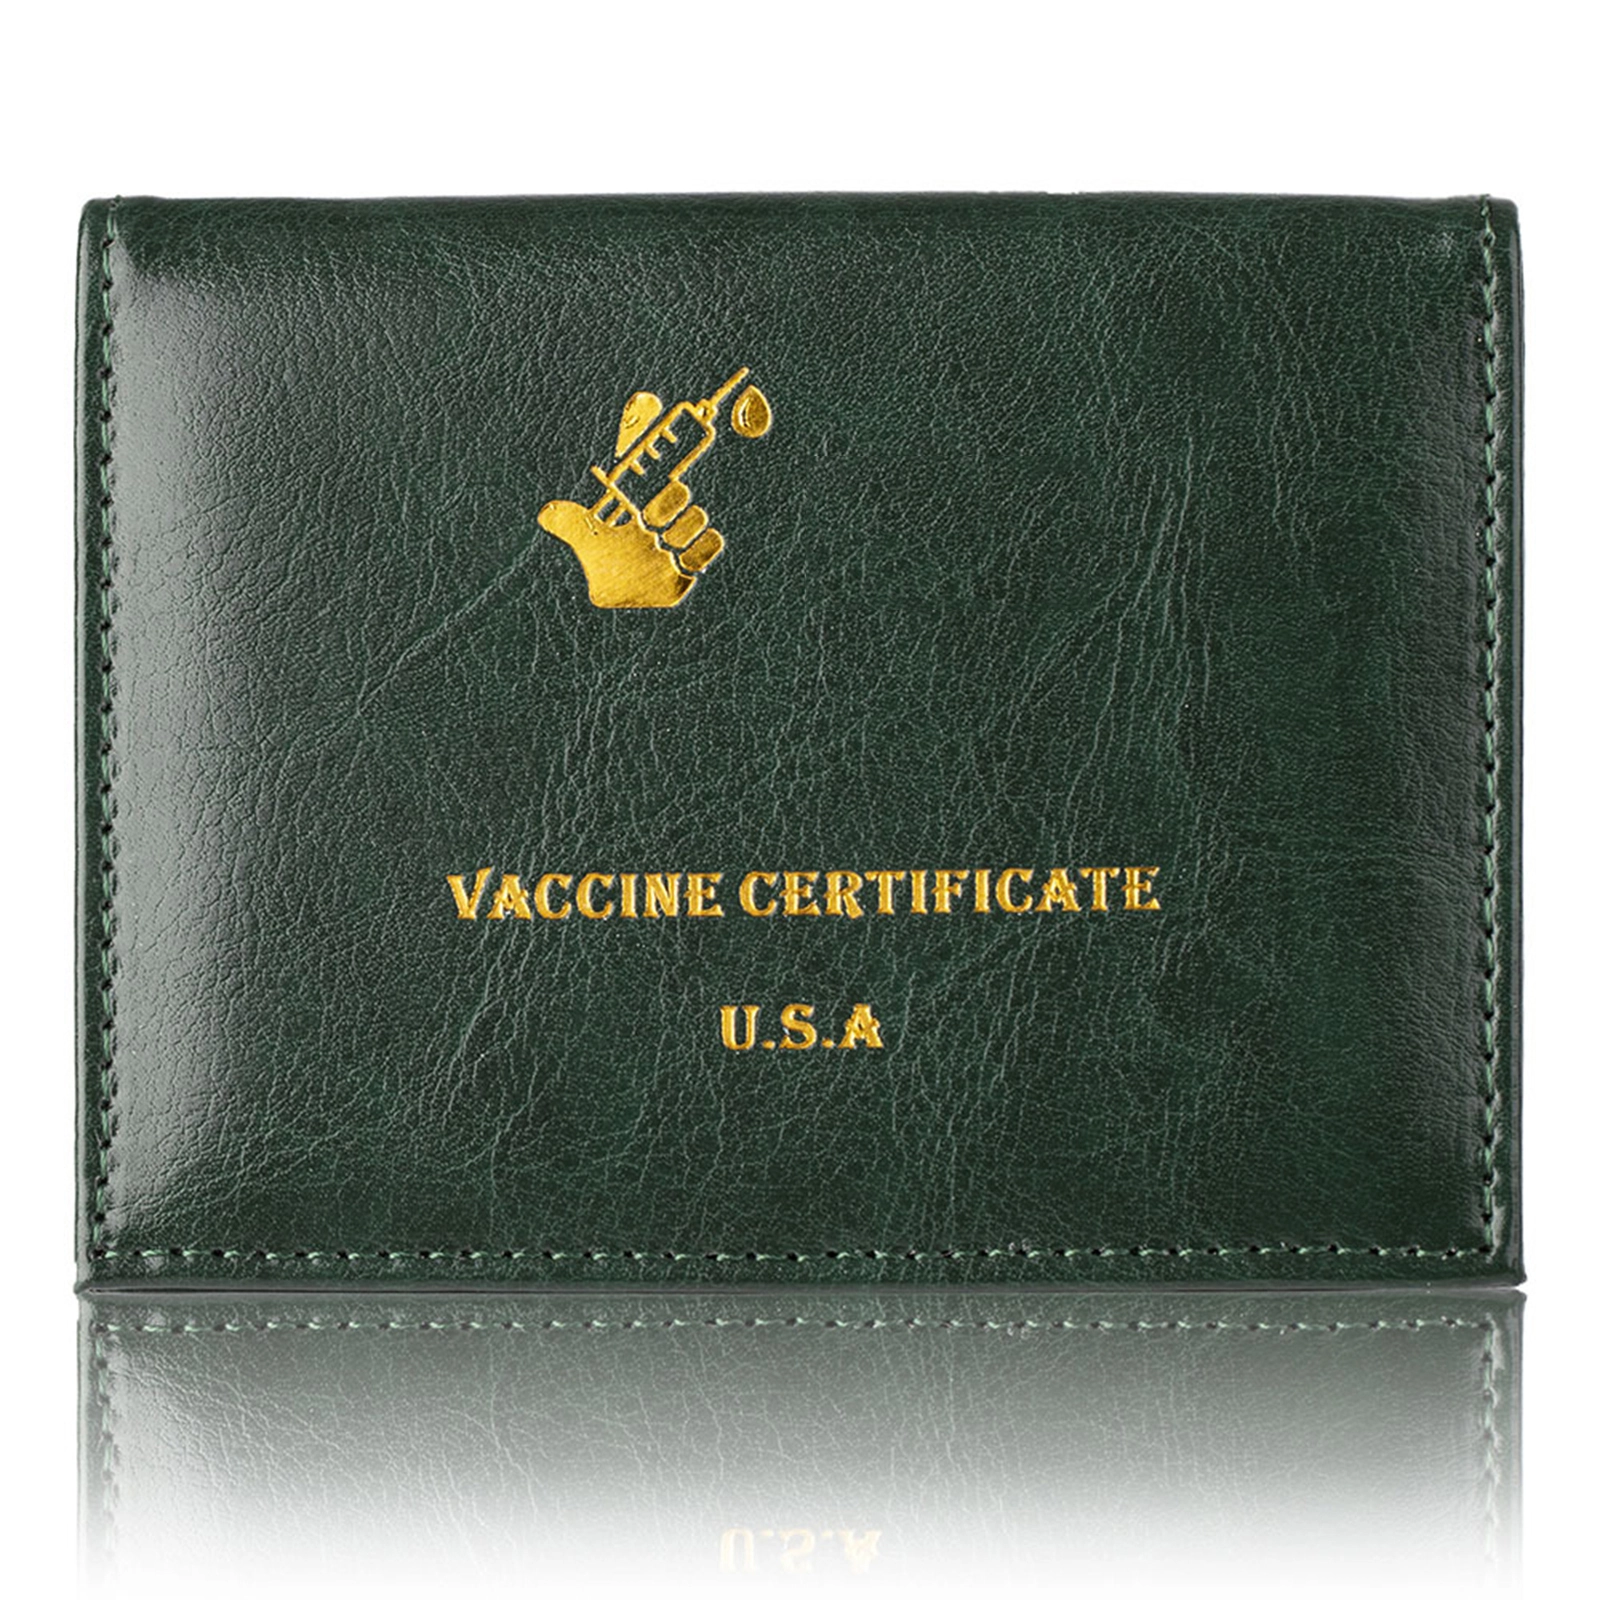 Multifunction Card Protector Registration Insurance Driving Documents Credit Cards PU Leather Holder Cover 6